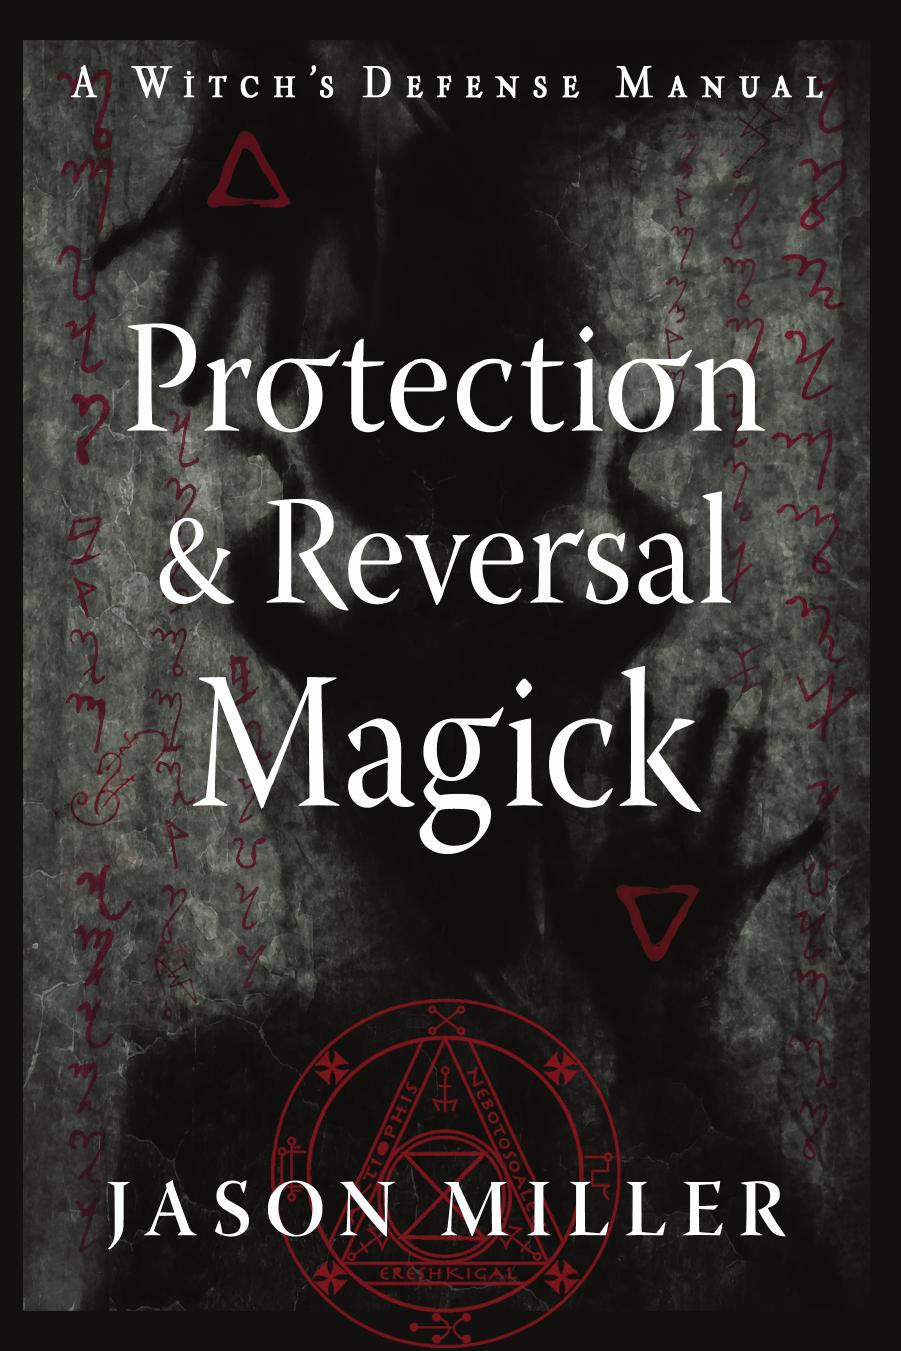 Protection & Reversal Magick (Revised and Updated Edition): A Witch's Defense Manual (Strategic Sorcery Series) by Jason Miller